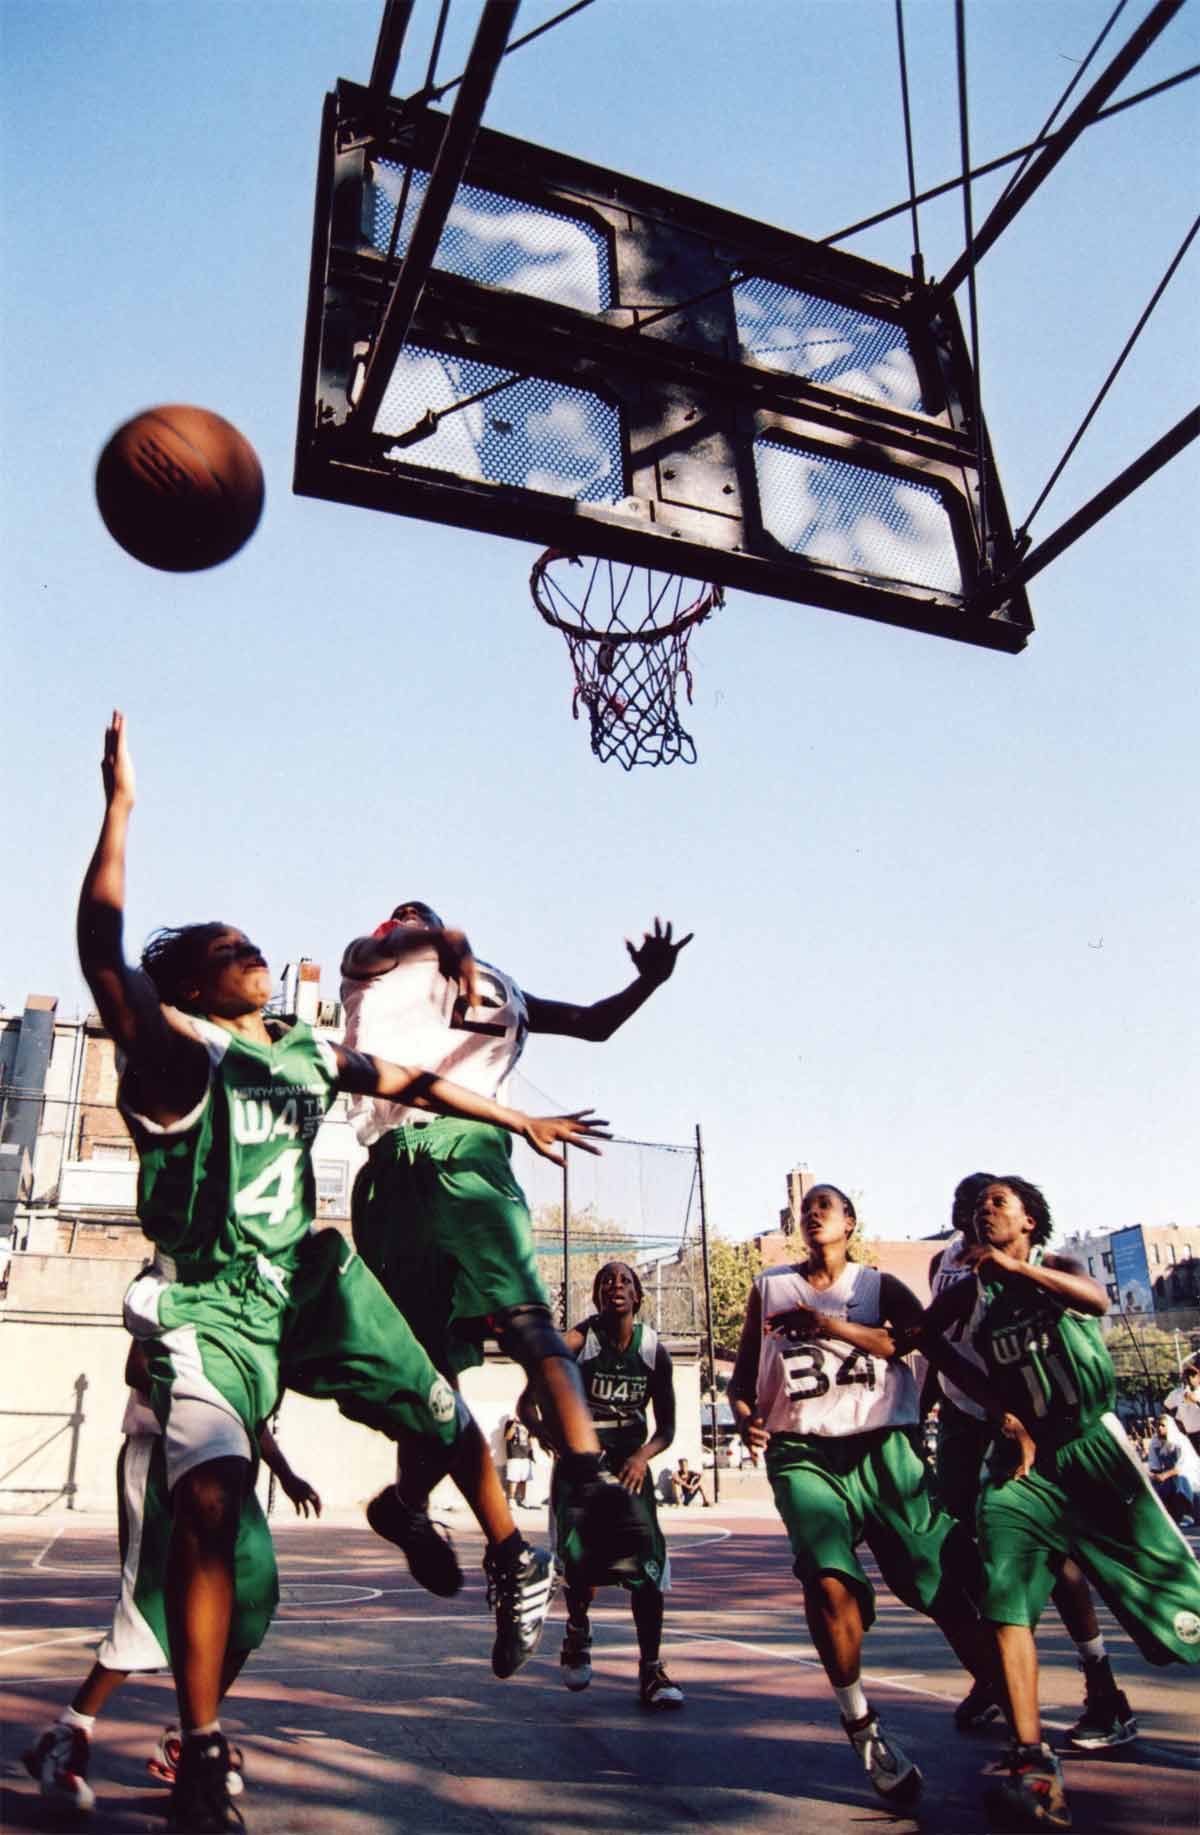 This photograph by Bobbito Garcia shows Bianca Brown #4 and Monique Coker #34 playing a tournament at West 4th Street circa 2003. 